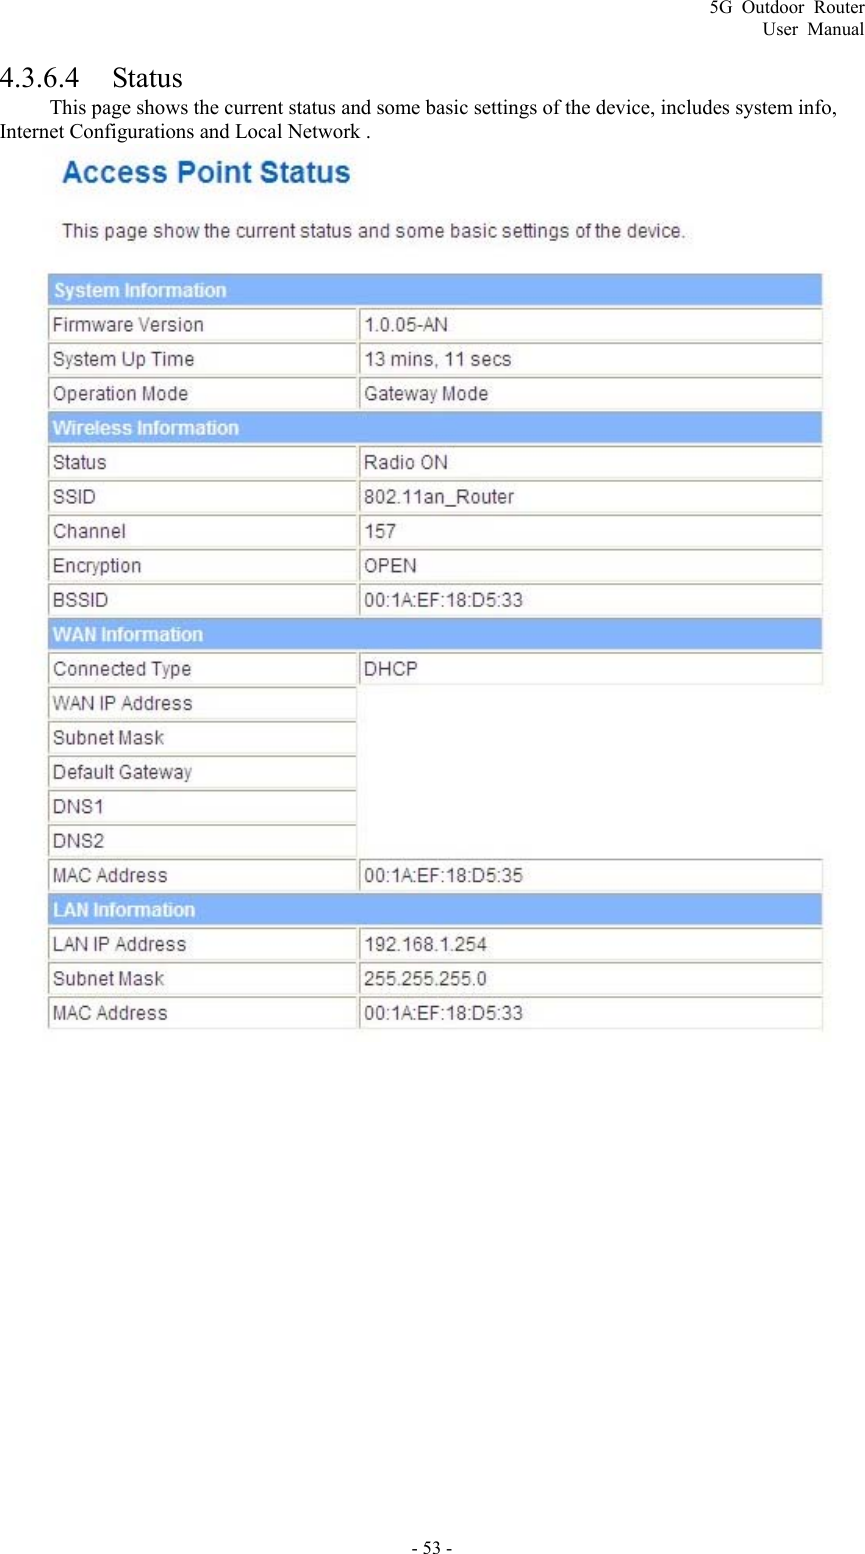 5G Outdoor Router User Manual - 53 - 4.3.6.4 Status This page shows the current status and some basic settings of the device, includes system info, Internet Configurations and Local Network .  